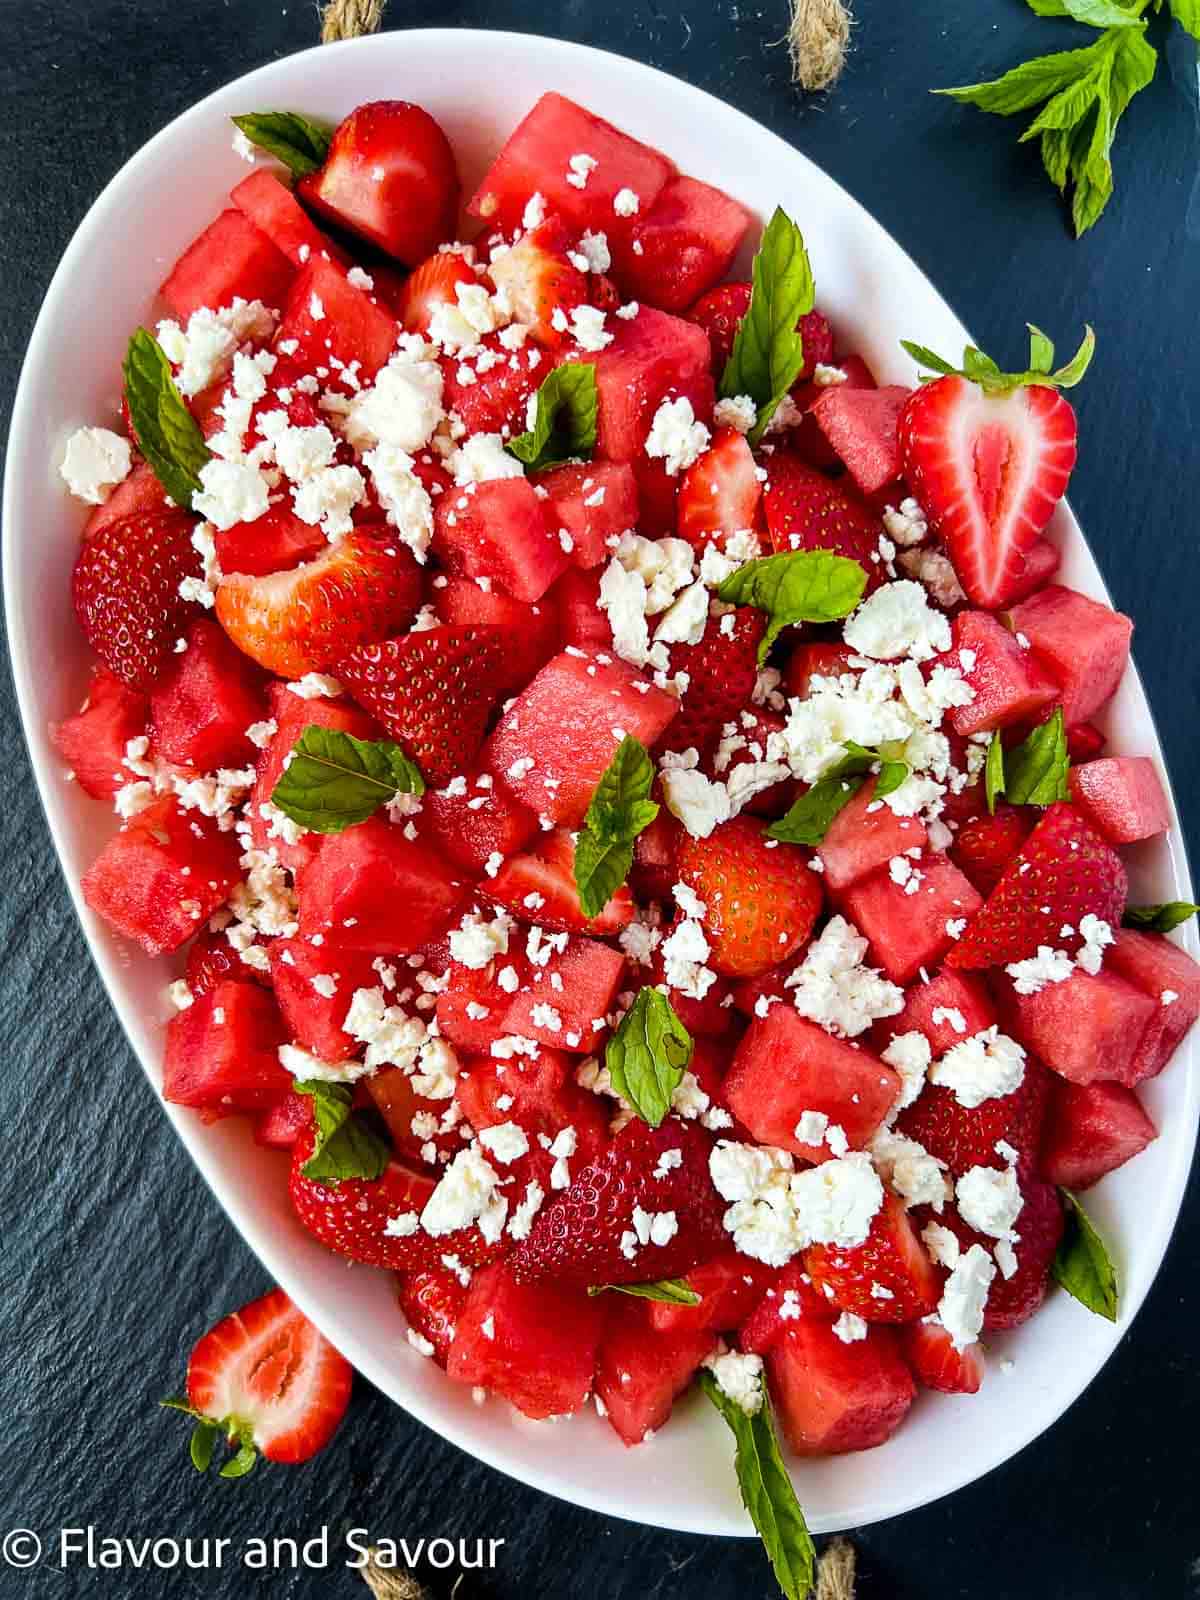 Overhead view of an oval bowl with strawberry watermelon salad with crumbled feta cheese and fresh mint leaves.